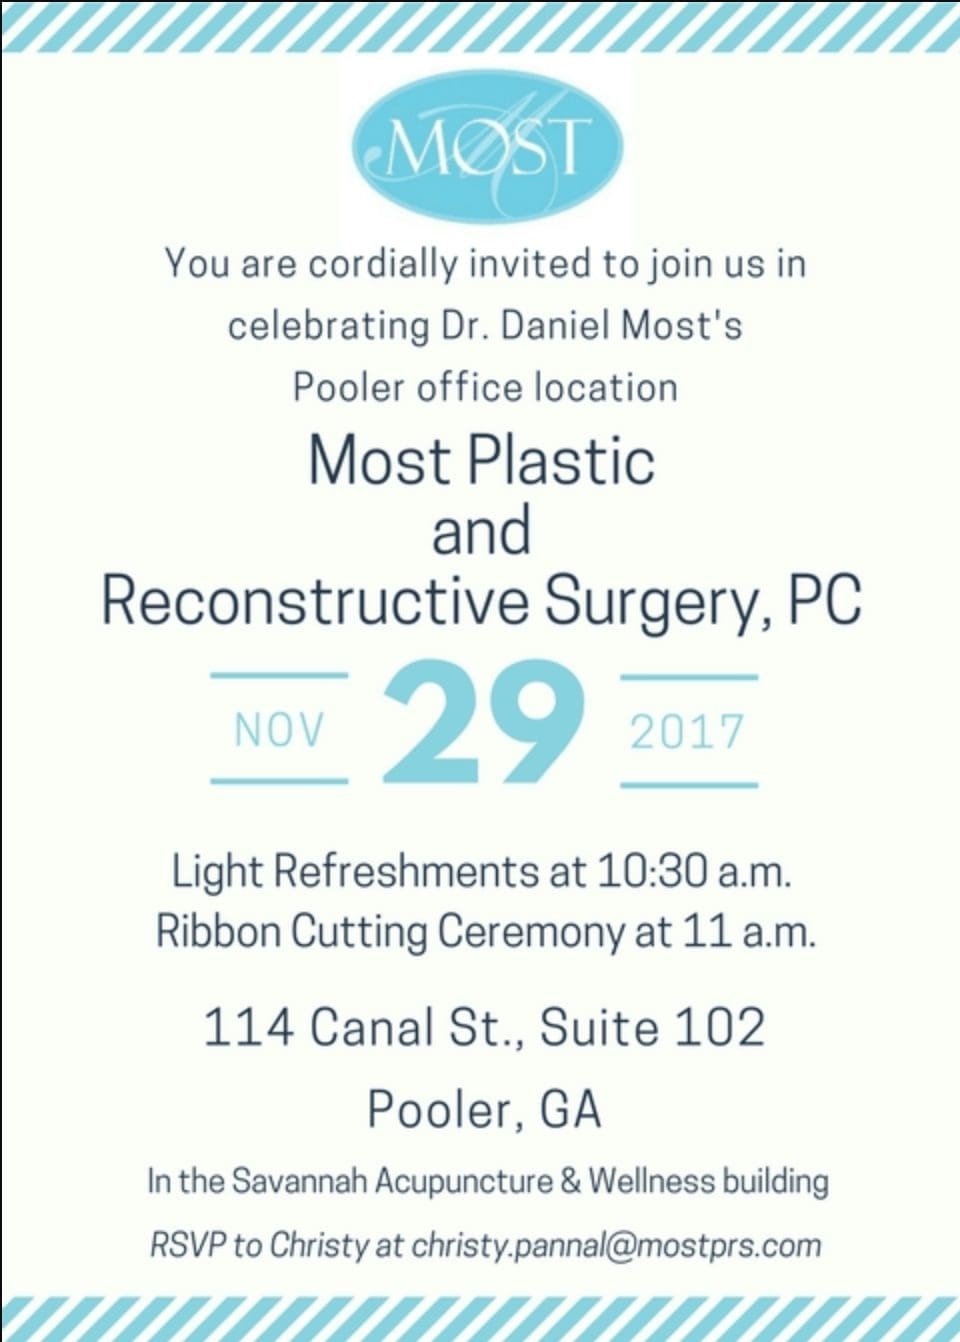 Most Plastic and Reconstructive Surgery, PC, Pooler Grand Opening